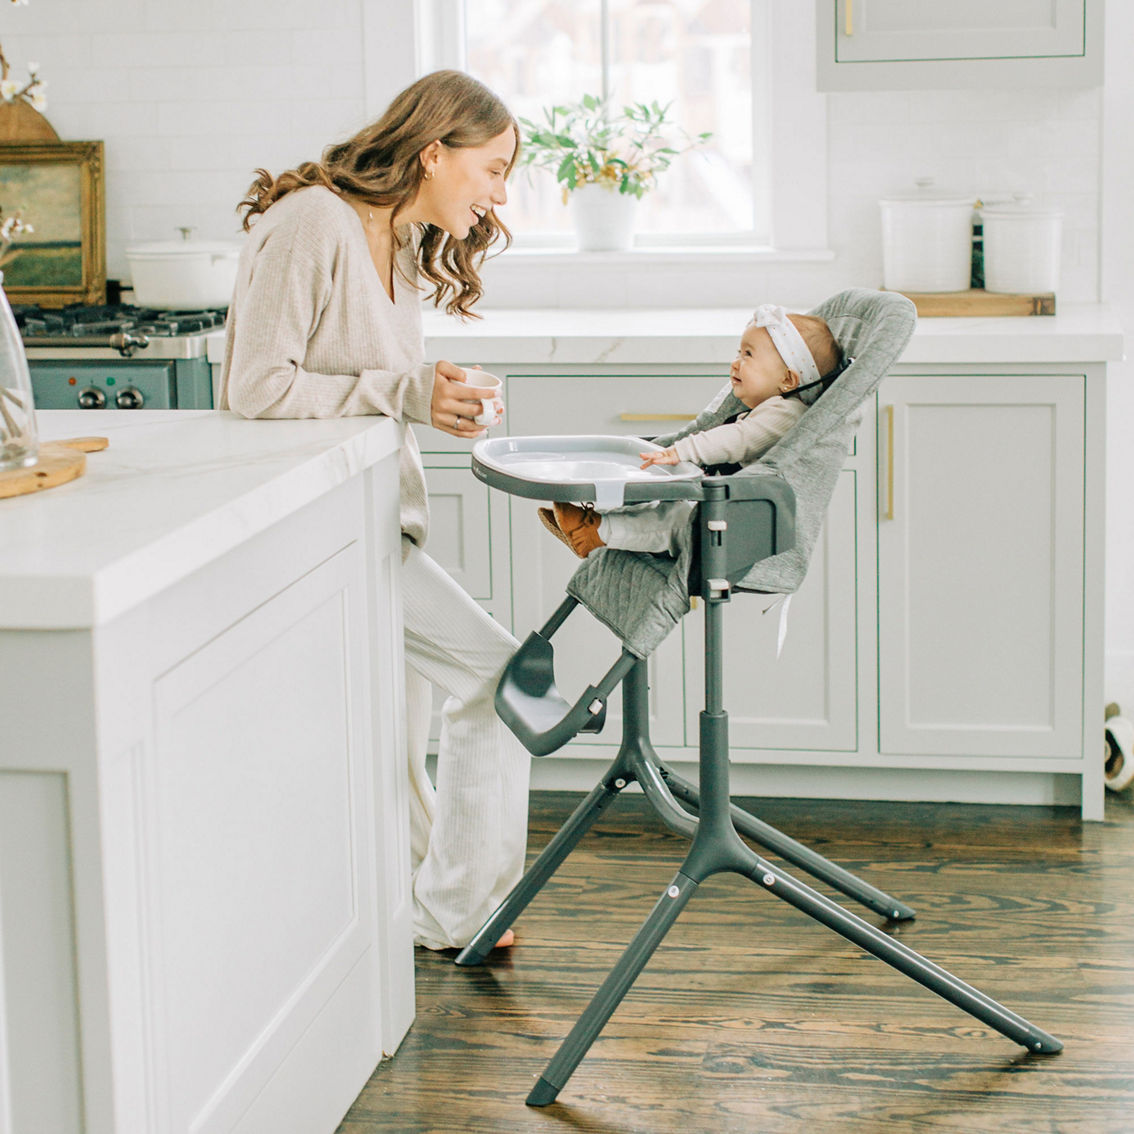 Baby Delight Adjustable High Chair - Image 4 of 5